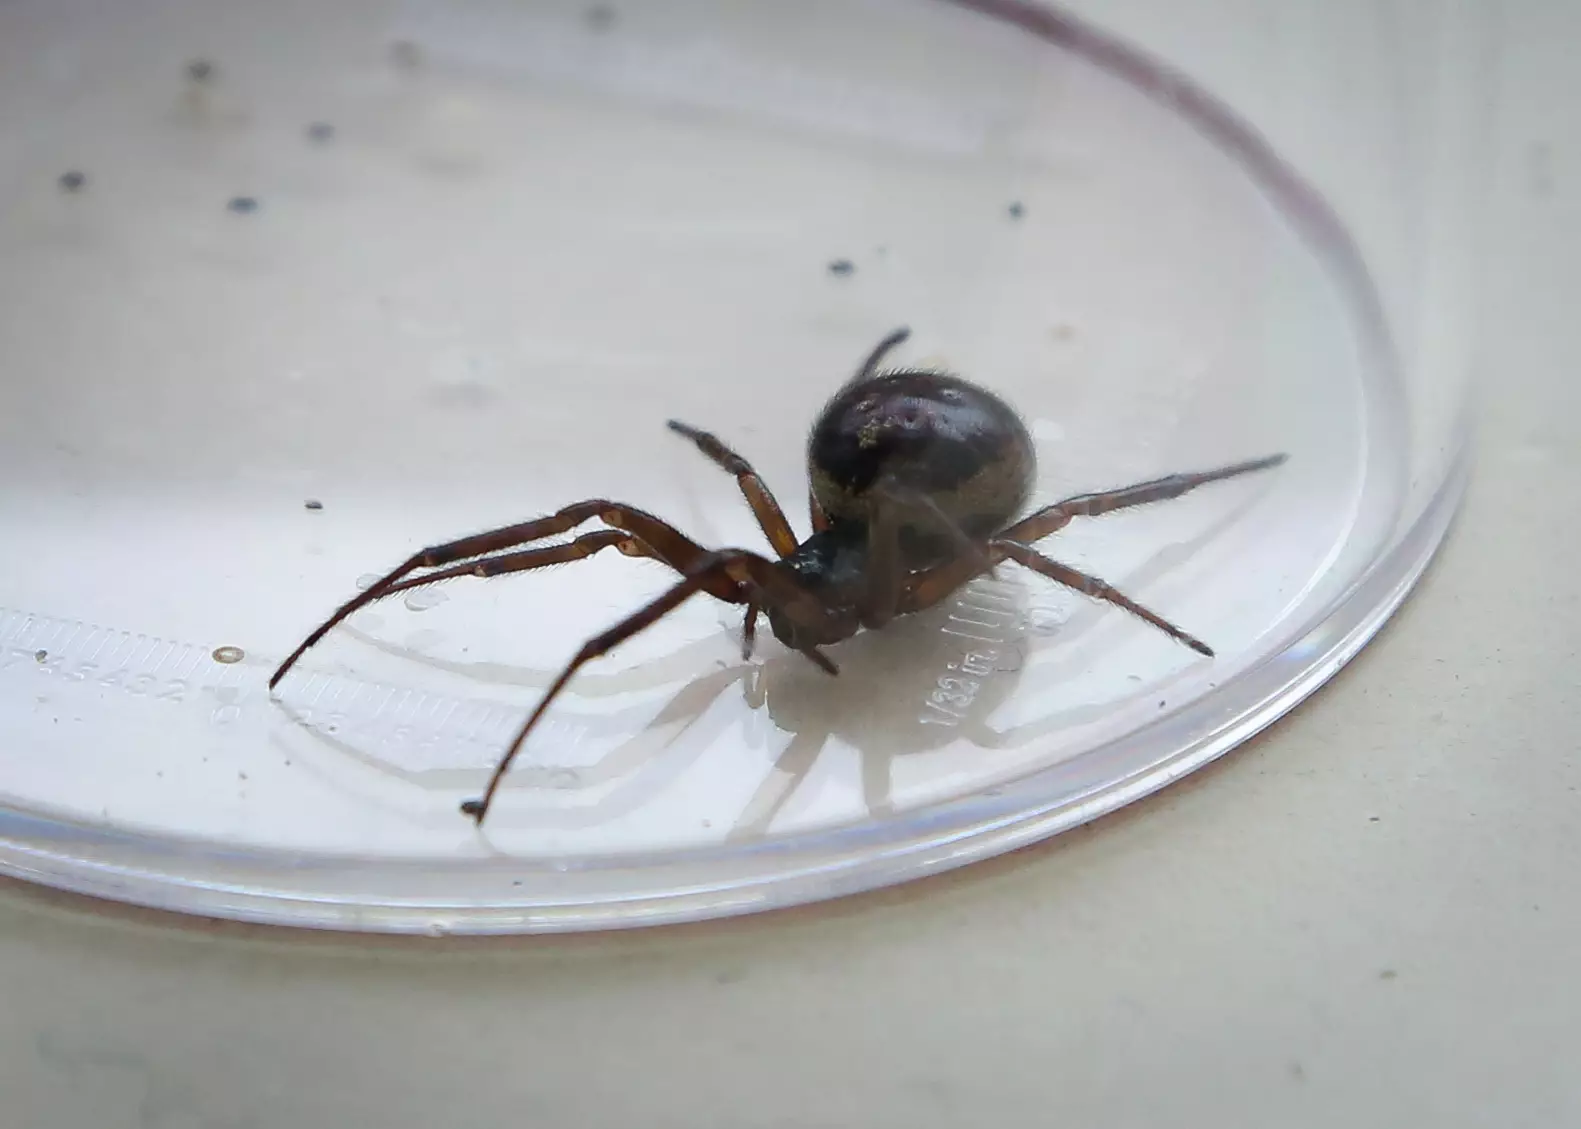 False widow spiders will give you a nip - avoid those.